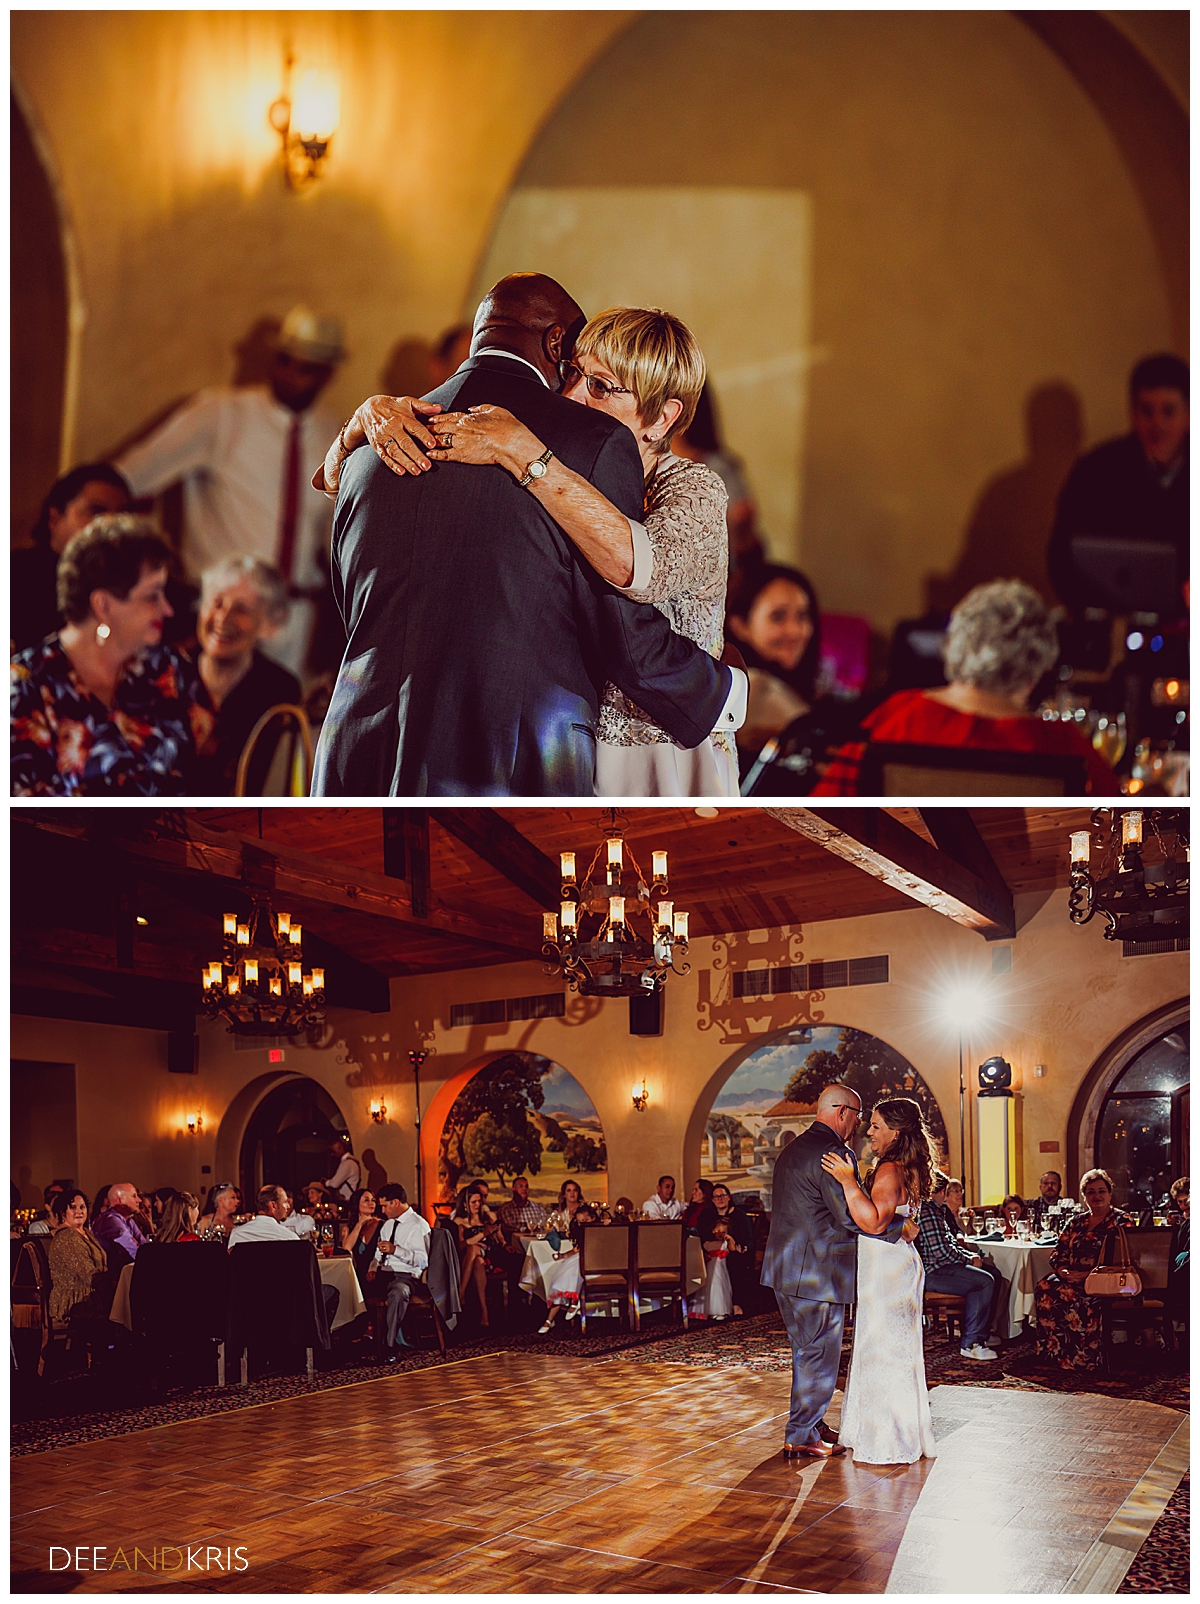 Two images: Top image of groom dancing with his mother. Bottom image of bride dancing with her father.